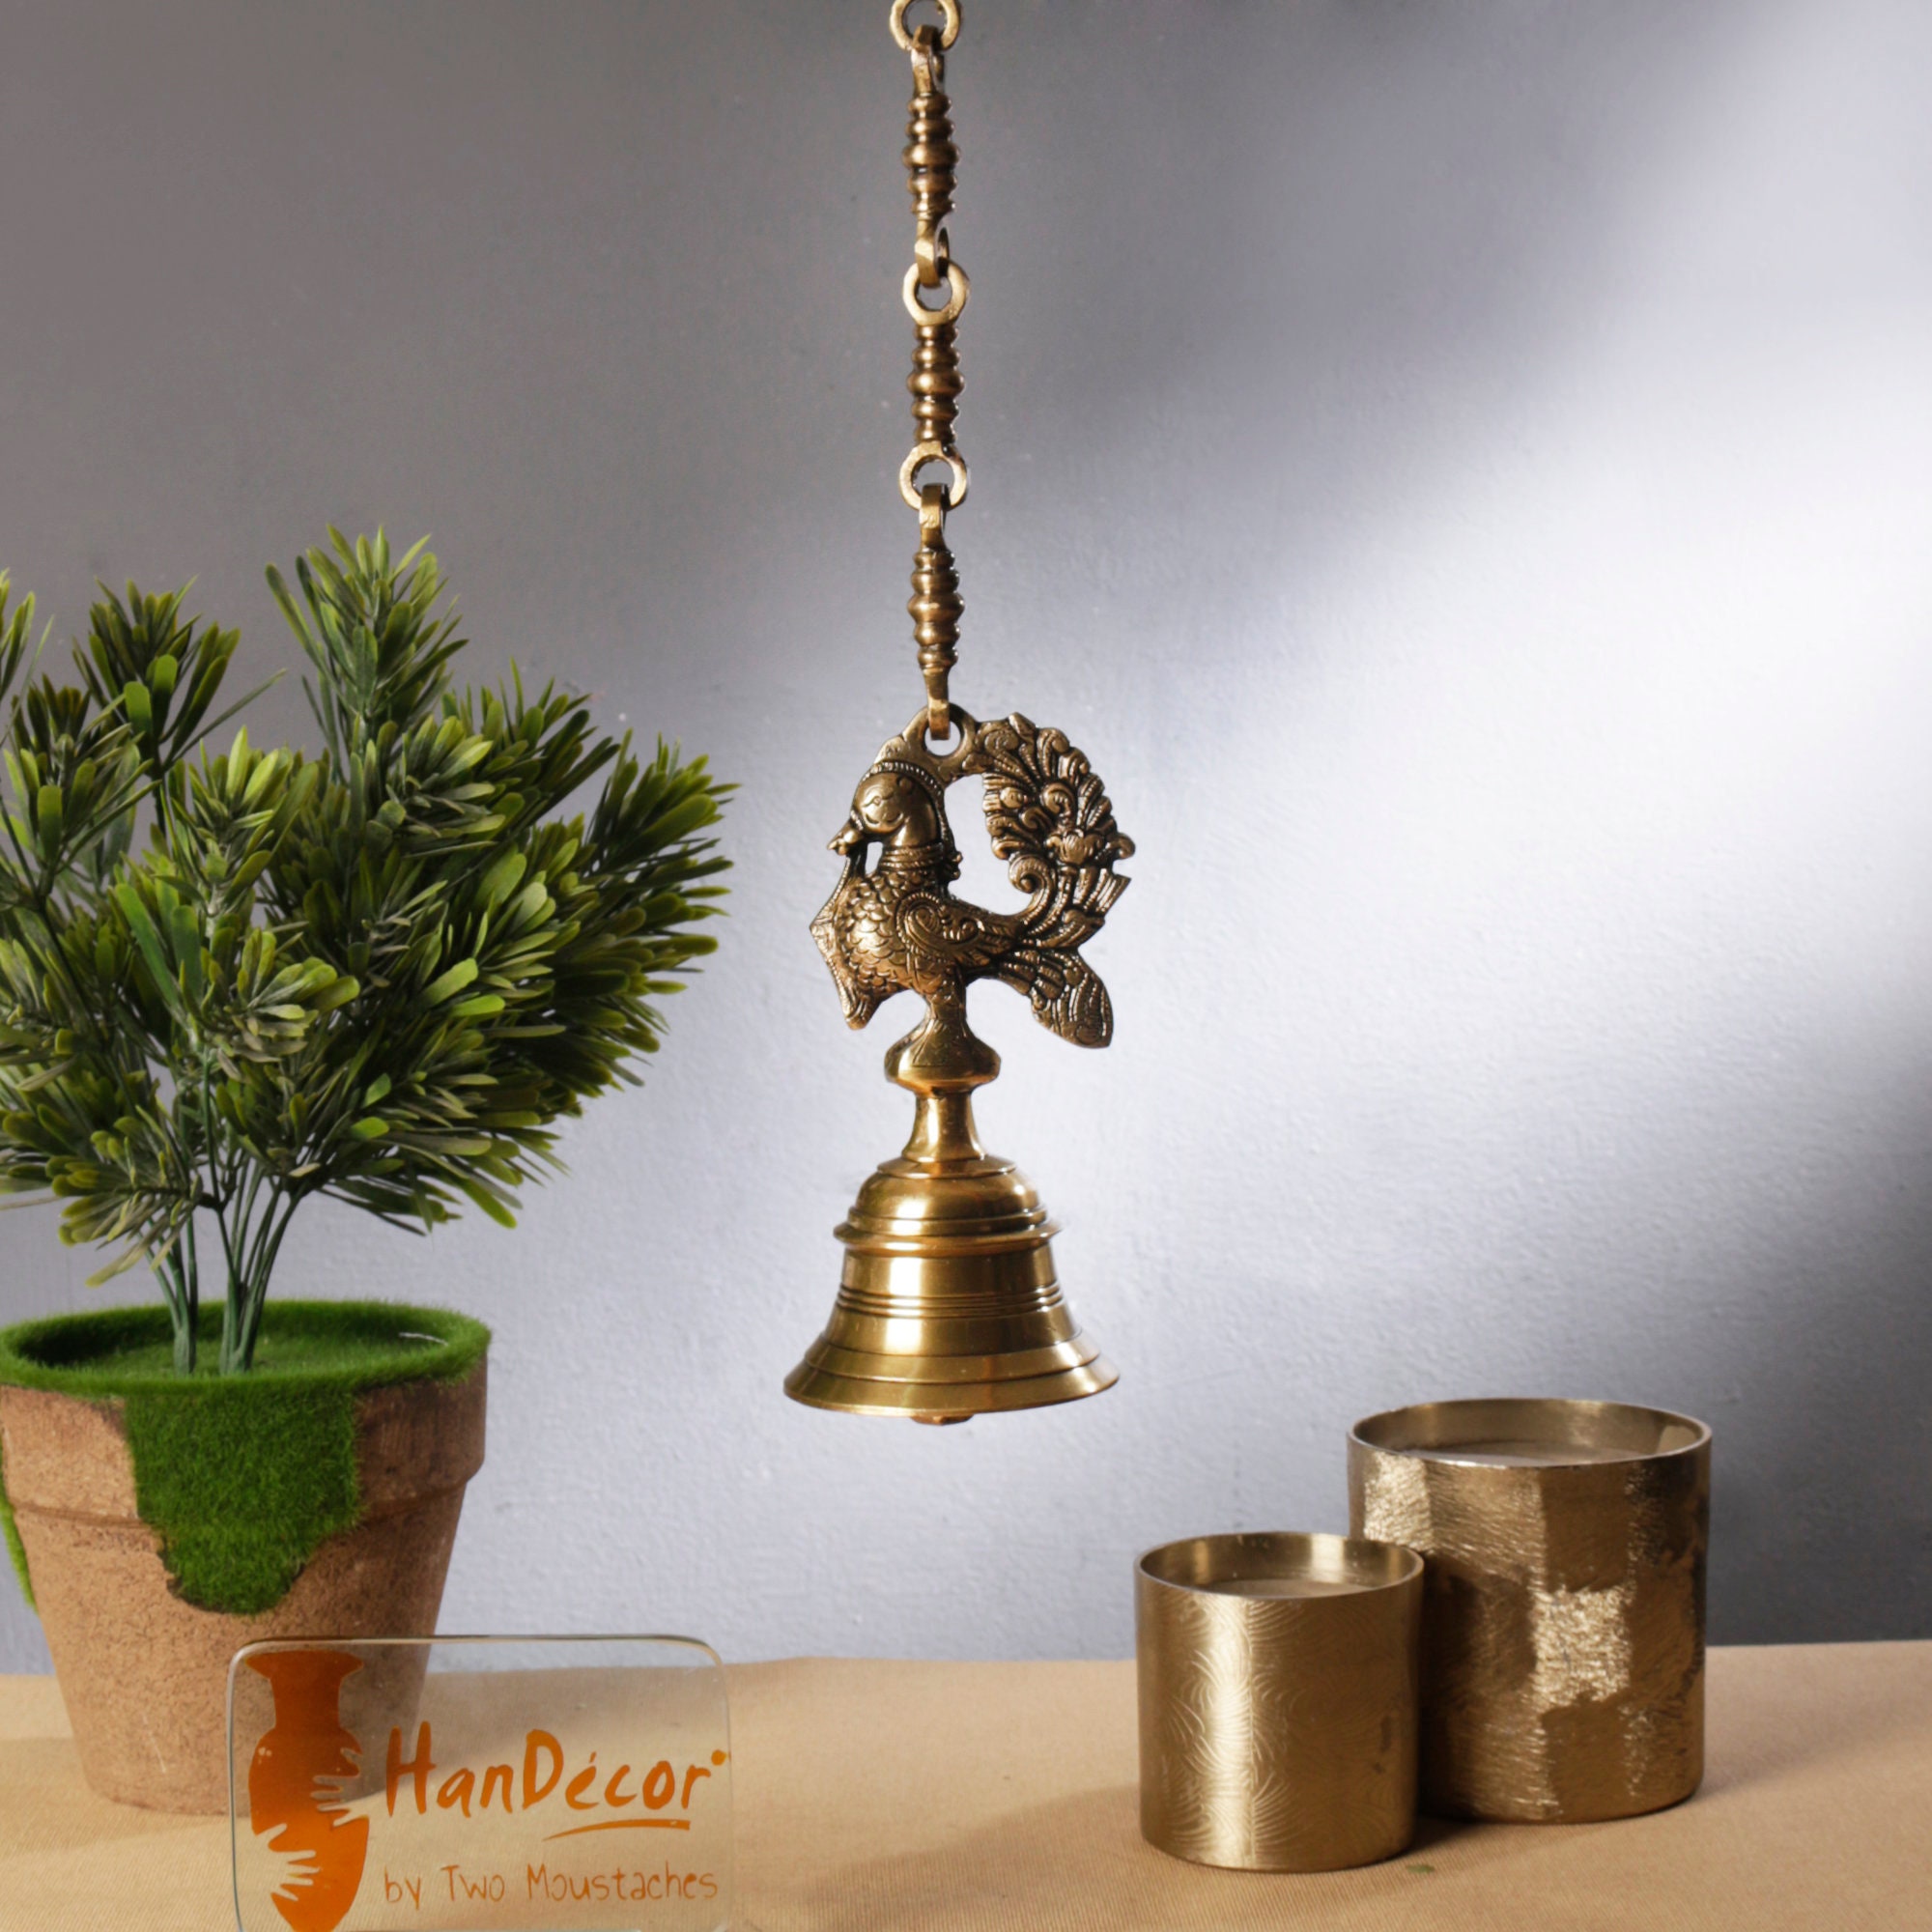 Vintage Brass Temple Bell With Peacock on Chain, Indian Decor Entrance,  Chain for Home Temple, Hallway, Porch or Balcony antique Finished 